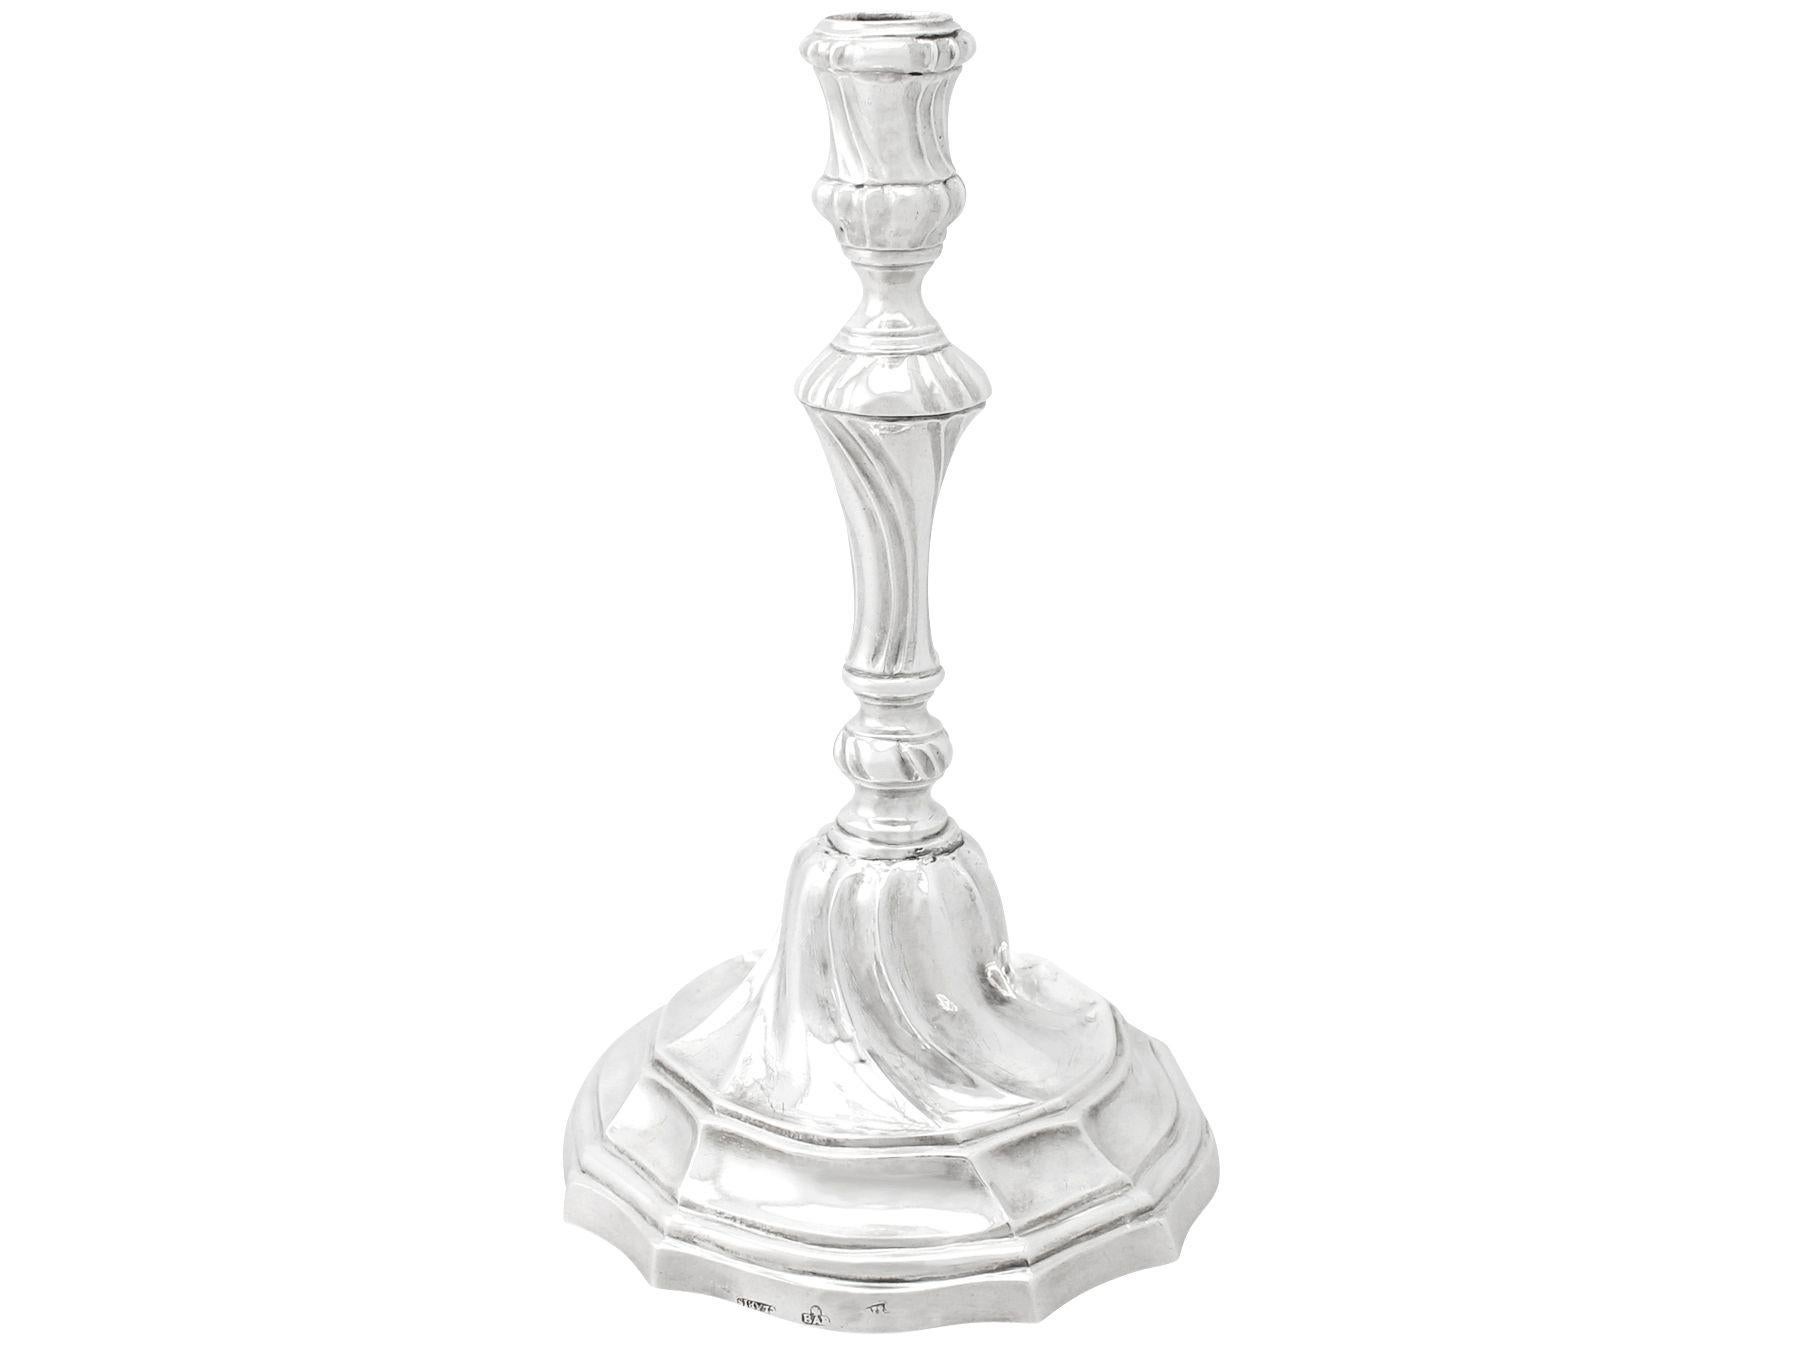 A fine and impressive antique Spanish silver candlestick; an addition of our ornamental silverware collection

This fine antique Spanish silver candlestick has a waisted circular shaped form onto a domed circular shaped base to a colet style